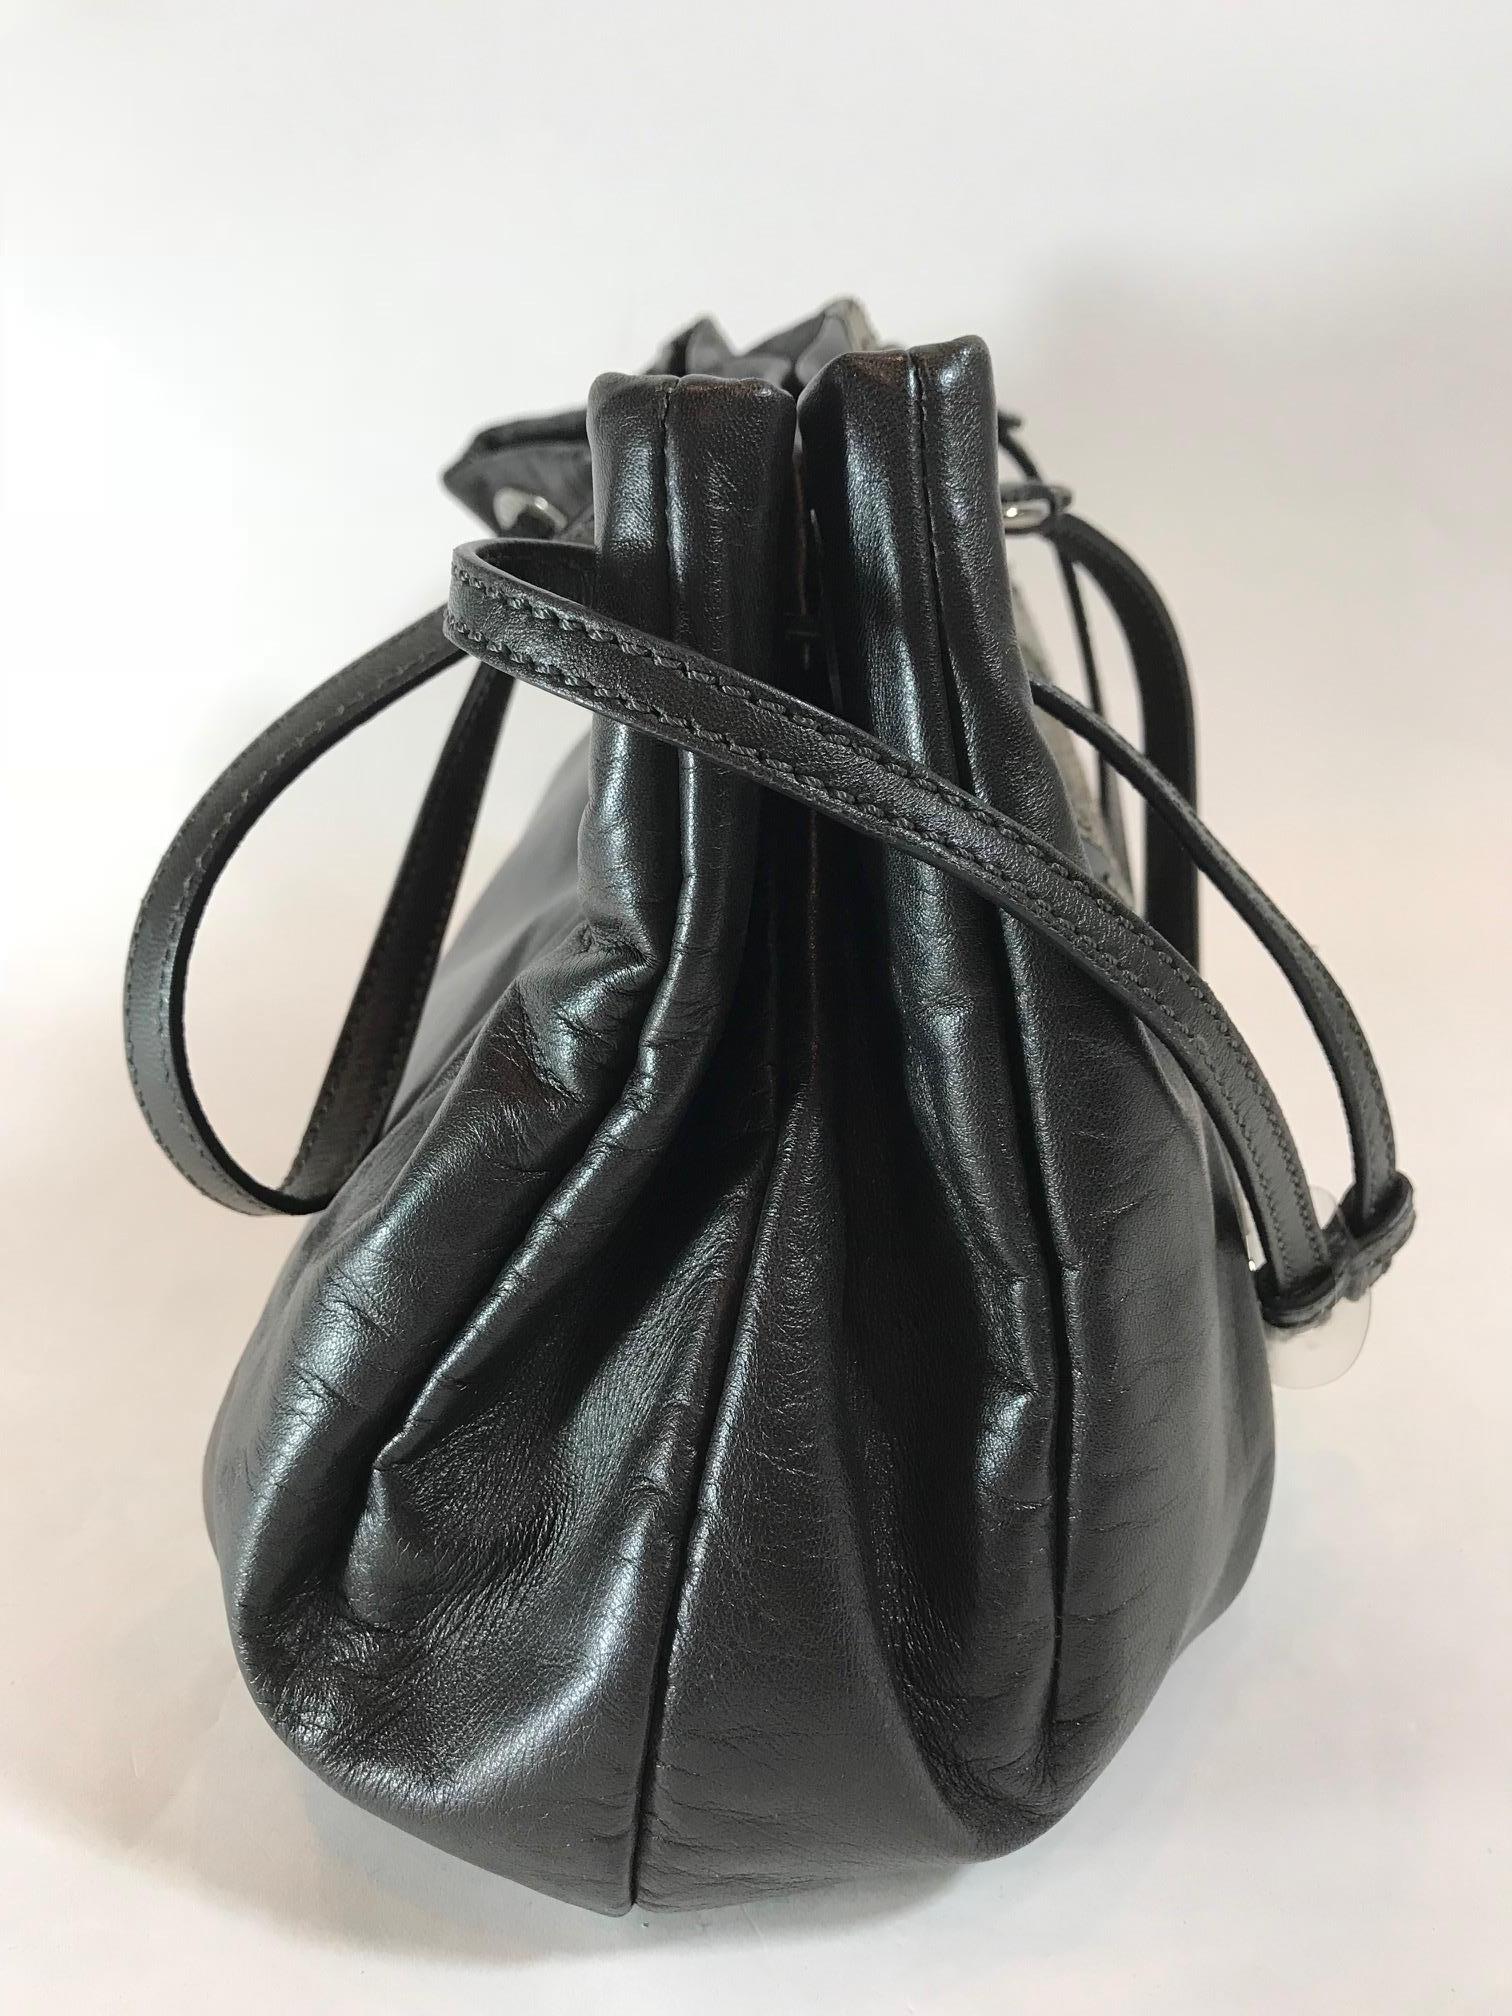 Blackish gray. Shiny beads on front reflect in different metallic shades. Silver hardware. Dual shoulder straps. Interior pocket with zipper closure. Two interior slit pockets. Features leather detailing.
